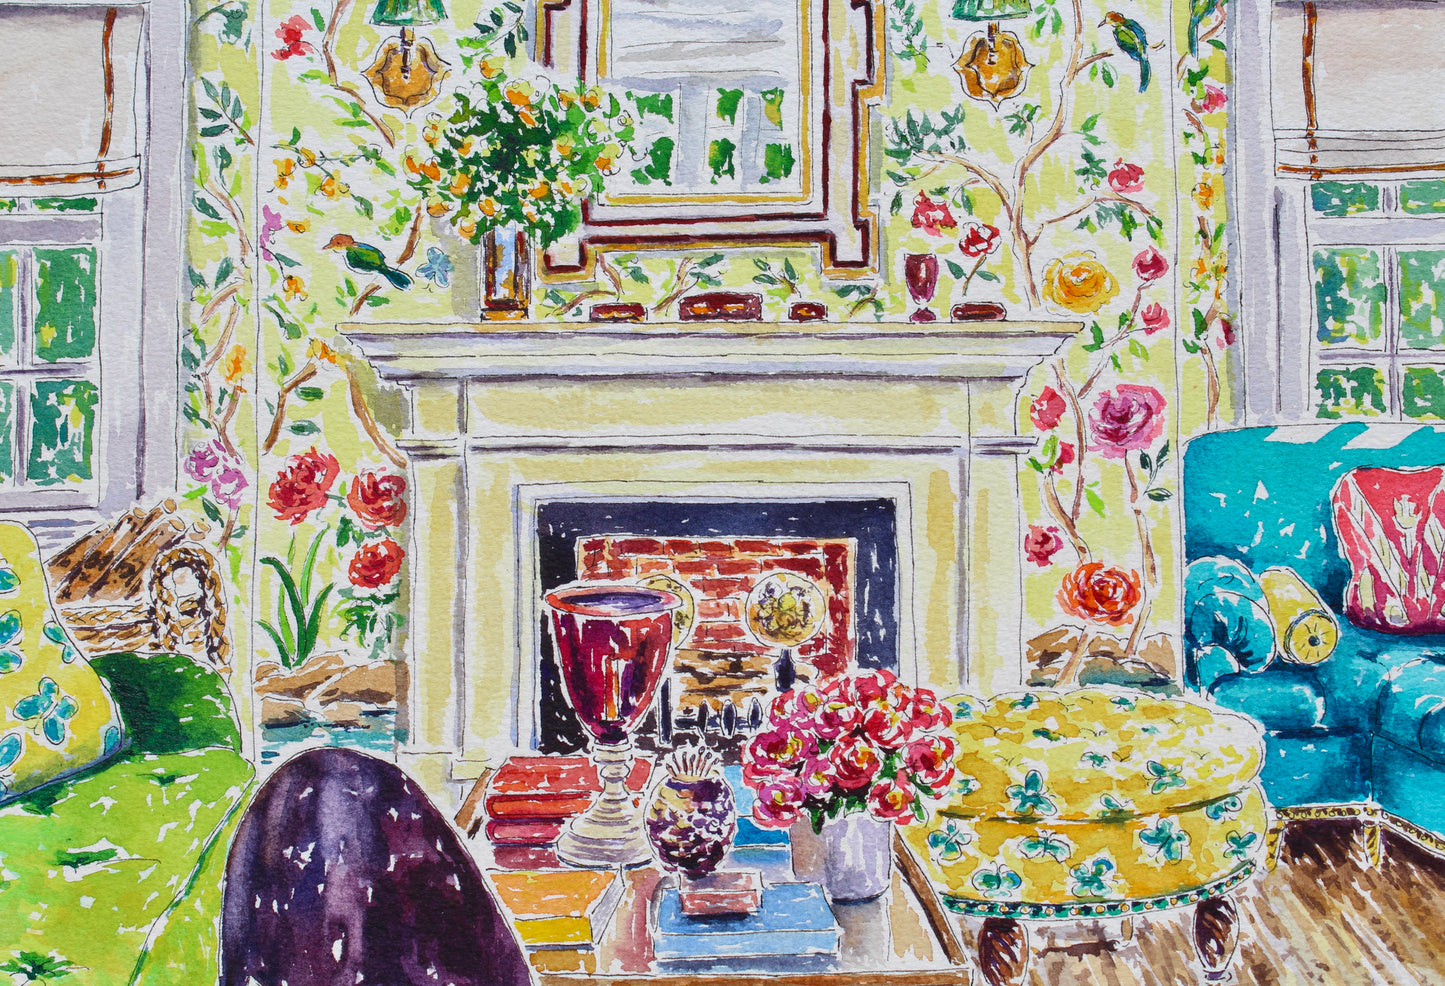 The Garden Room, An Original 16" x 12" Watercolor And Ink Painting Of An Interior Room Scene With Degournay Wallpaper